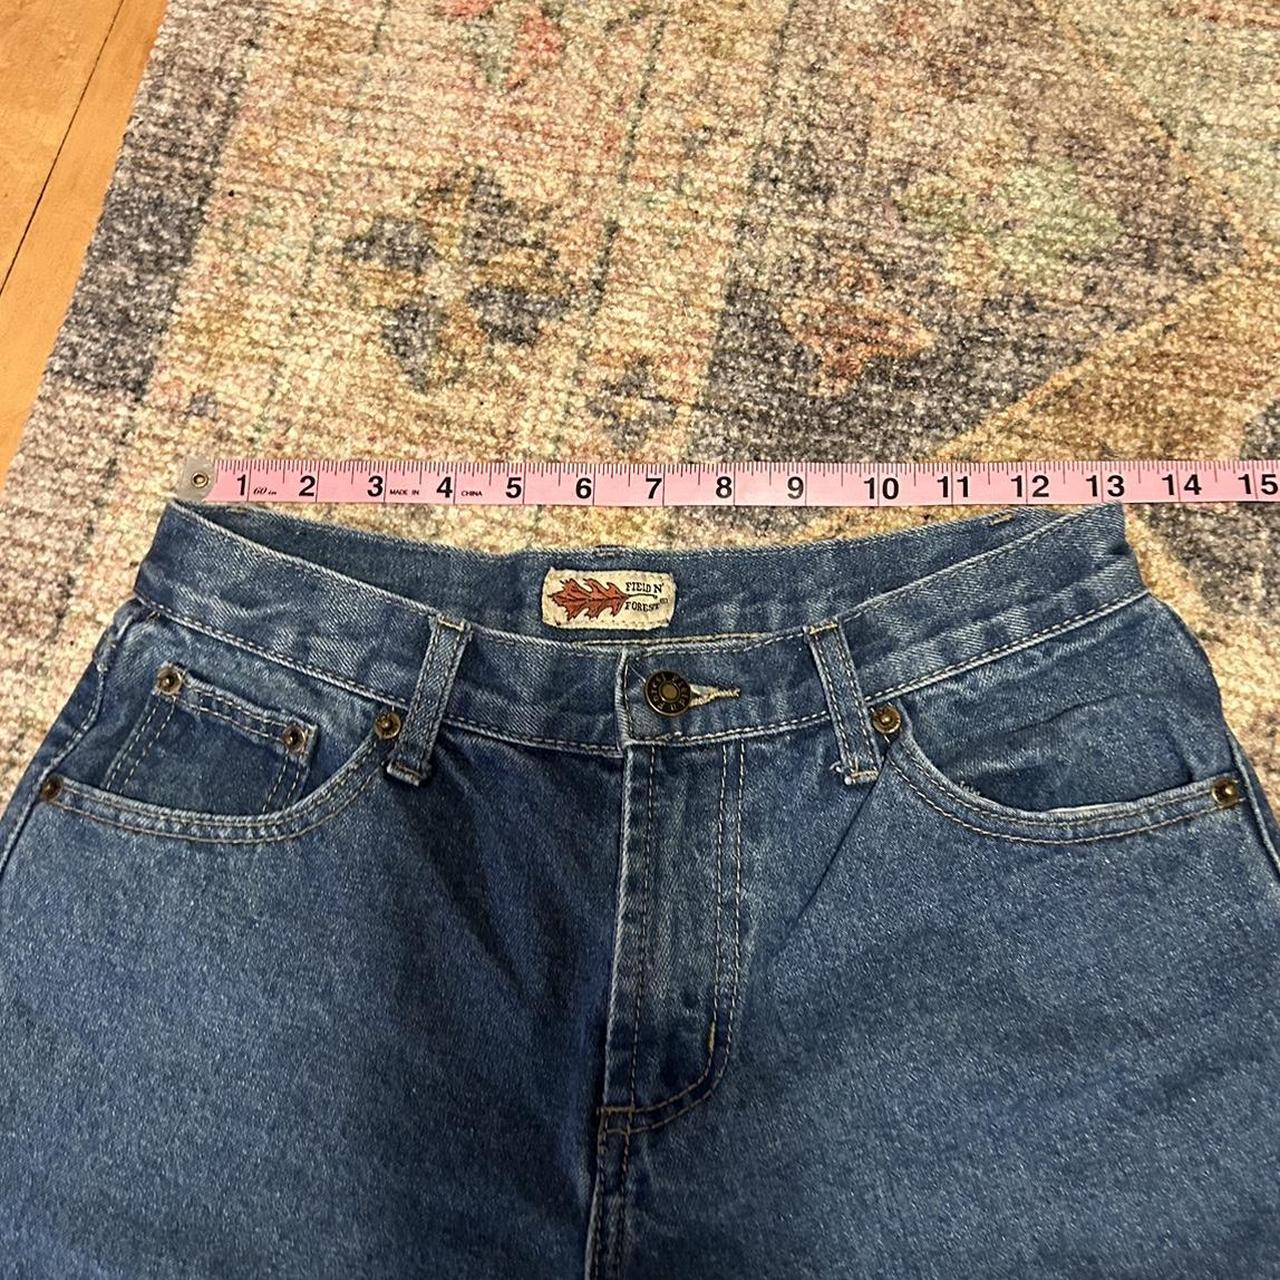 Retro style blue jeans Field and forest Kids size... - Depop